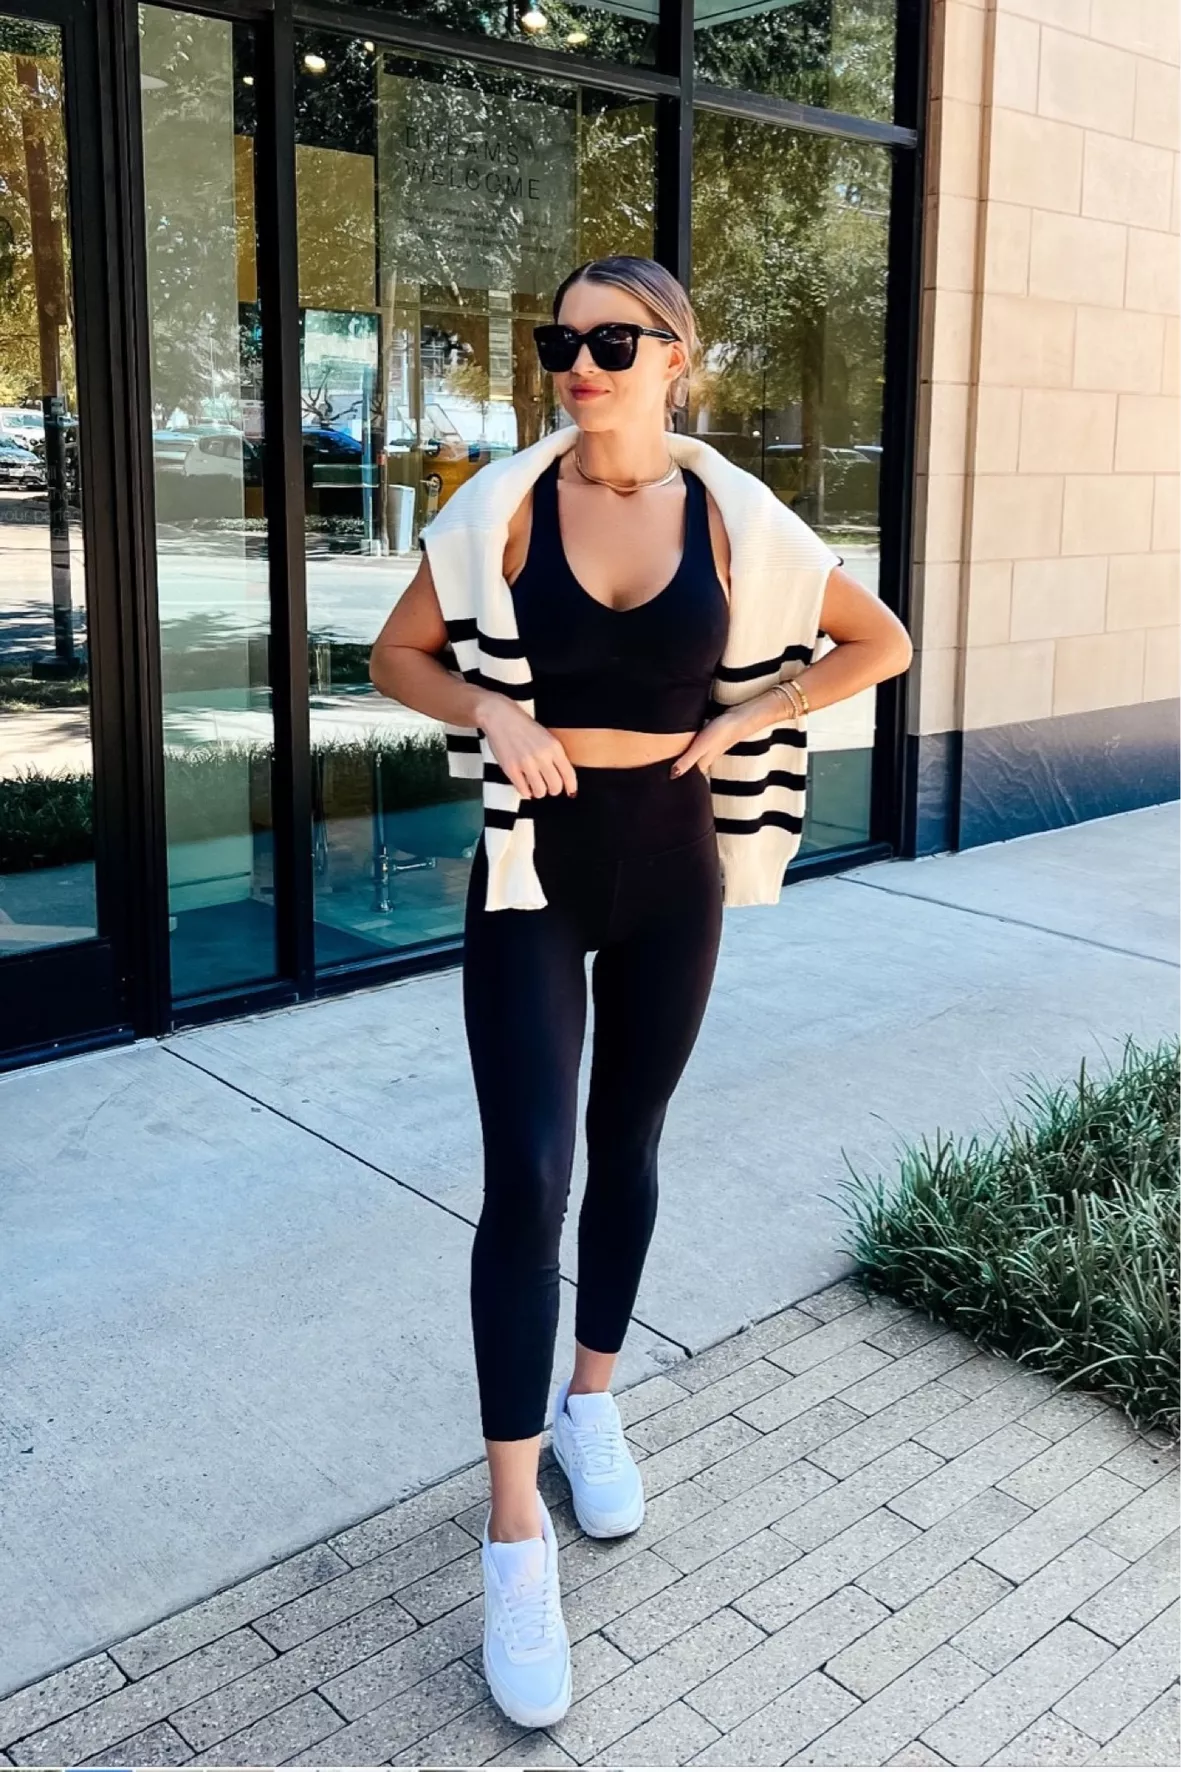 comfy outfits for travelling  Athleisure outfits, Sporty outfits